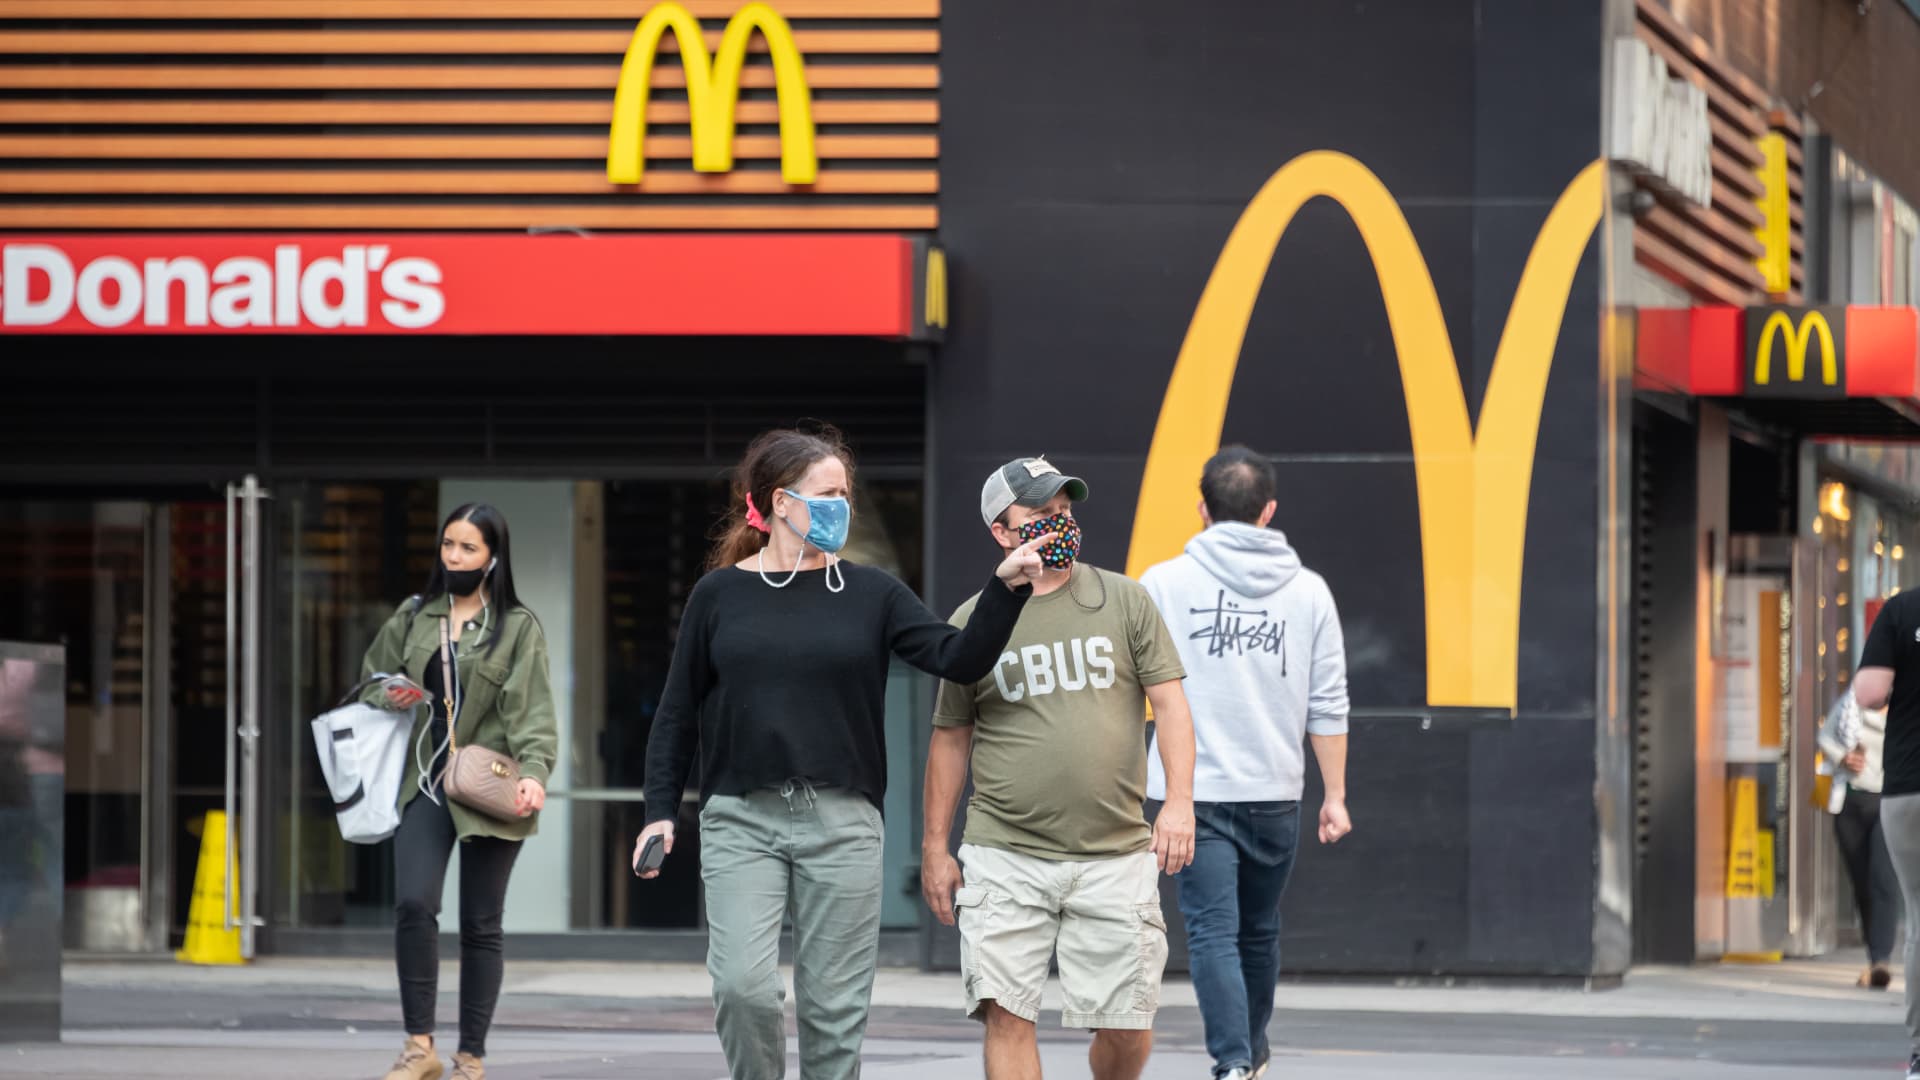 People wear protective face masks outside McDonald's in Times Square as the city continues Phase 4 of re-opening following restrictions imposed to slow the spread of coronavirus on September 18, 2020 in New York City.